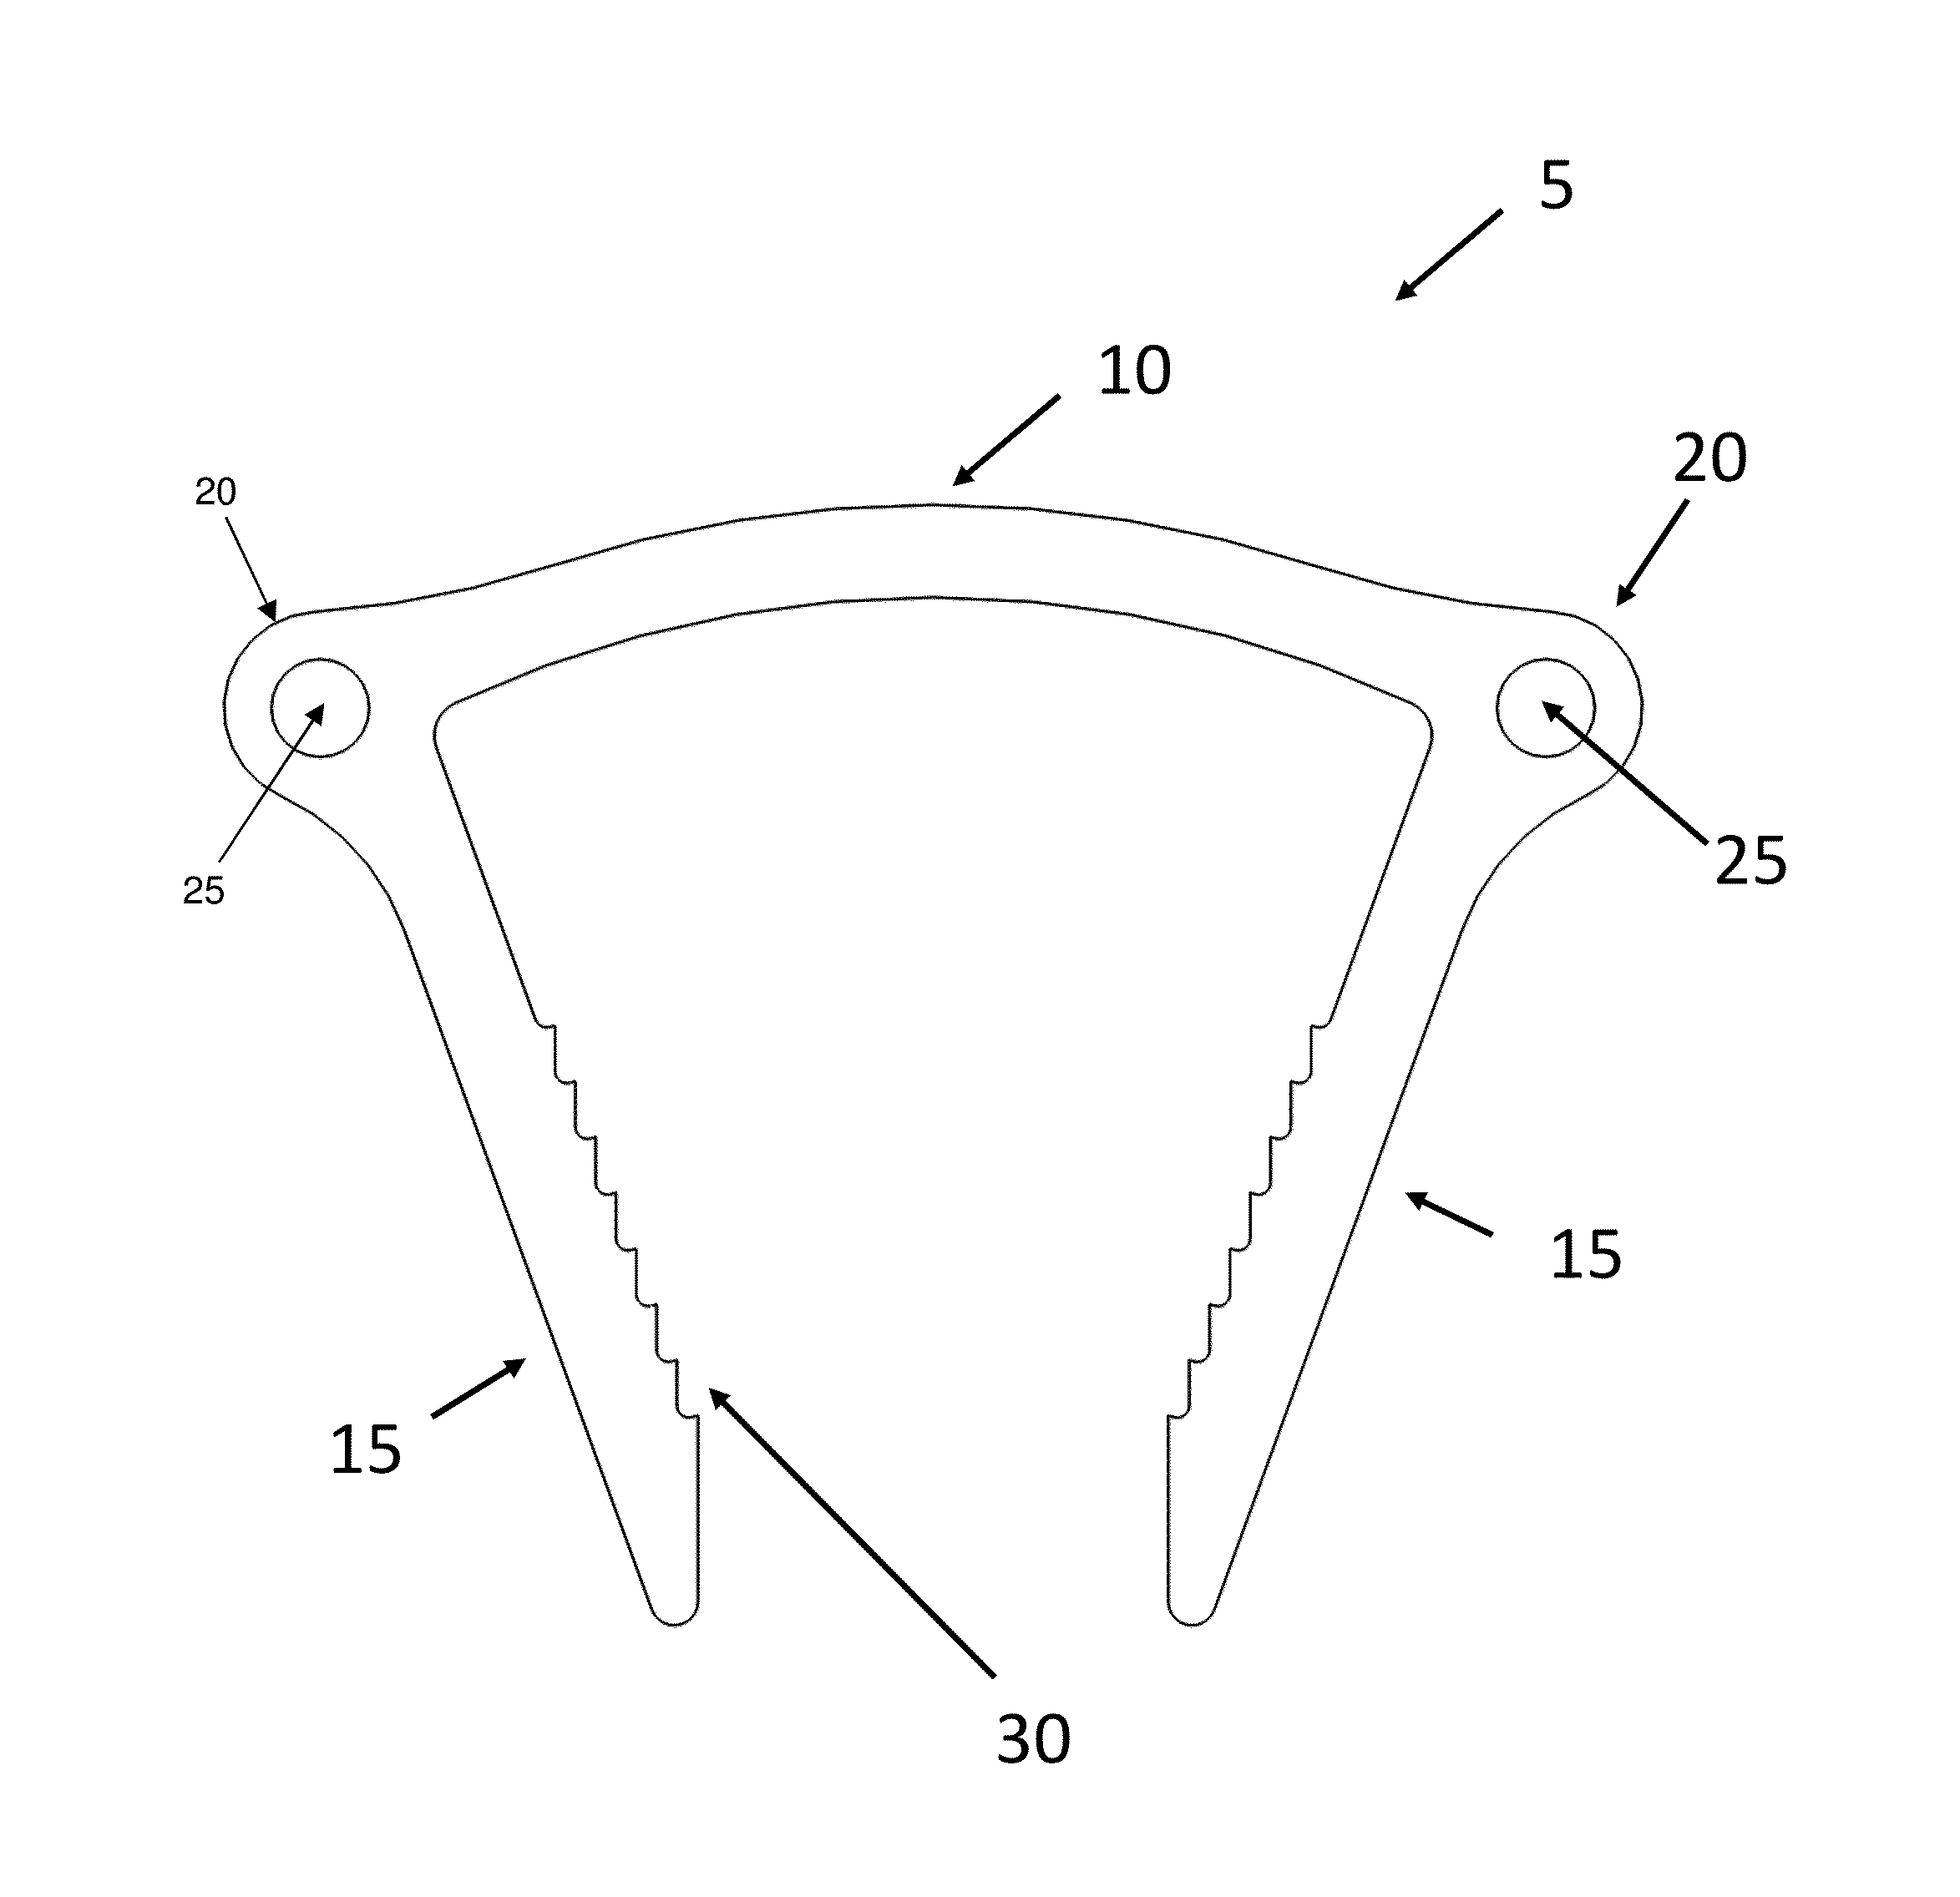 Staples for generating and applying compression within a body